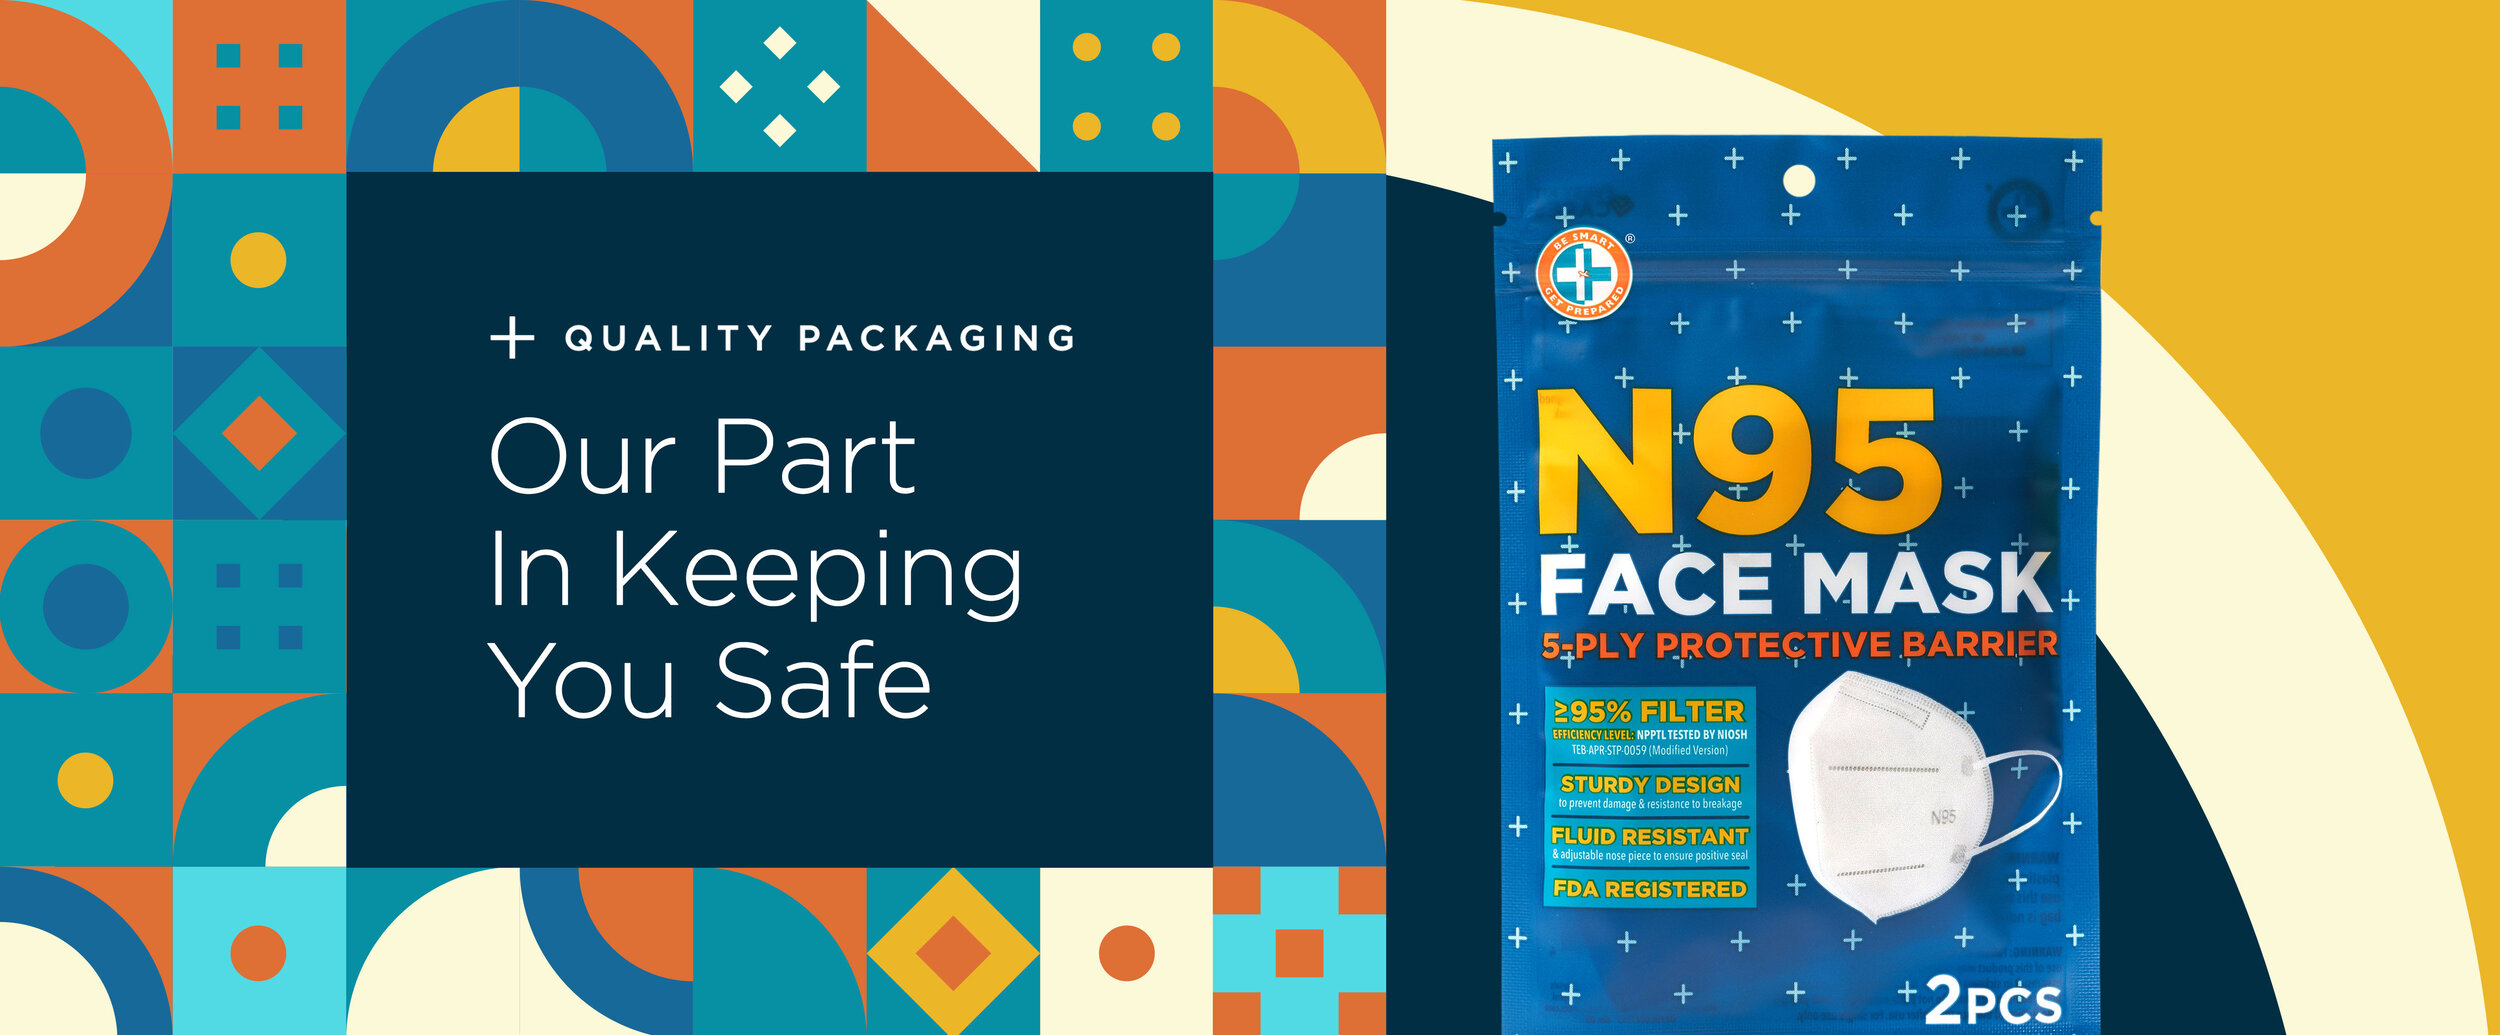 Image of N95 Face Masks Packaging with caption reading “Quality Packaging - Our Part in Keeping You Safe”